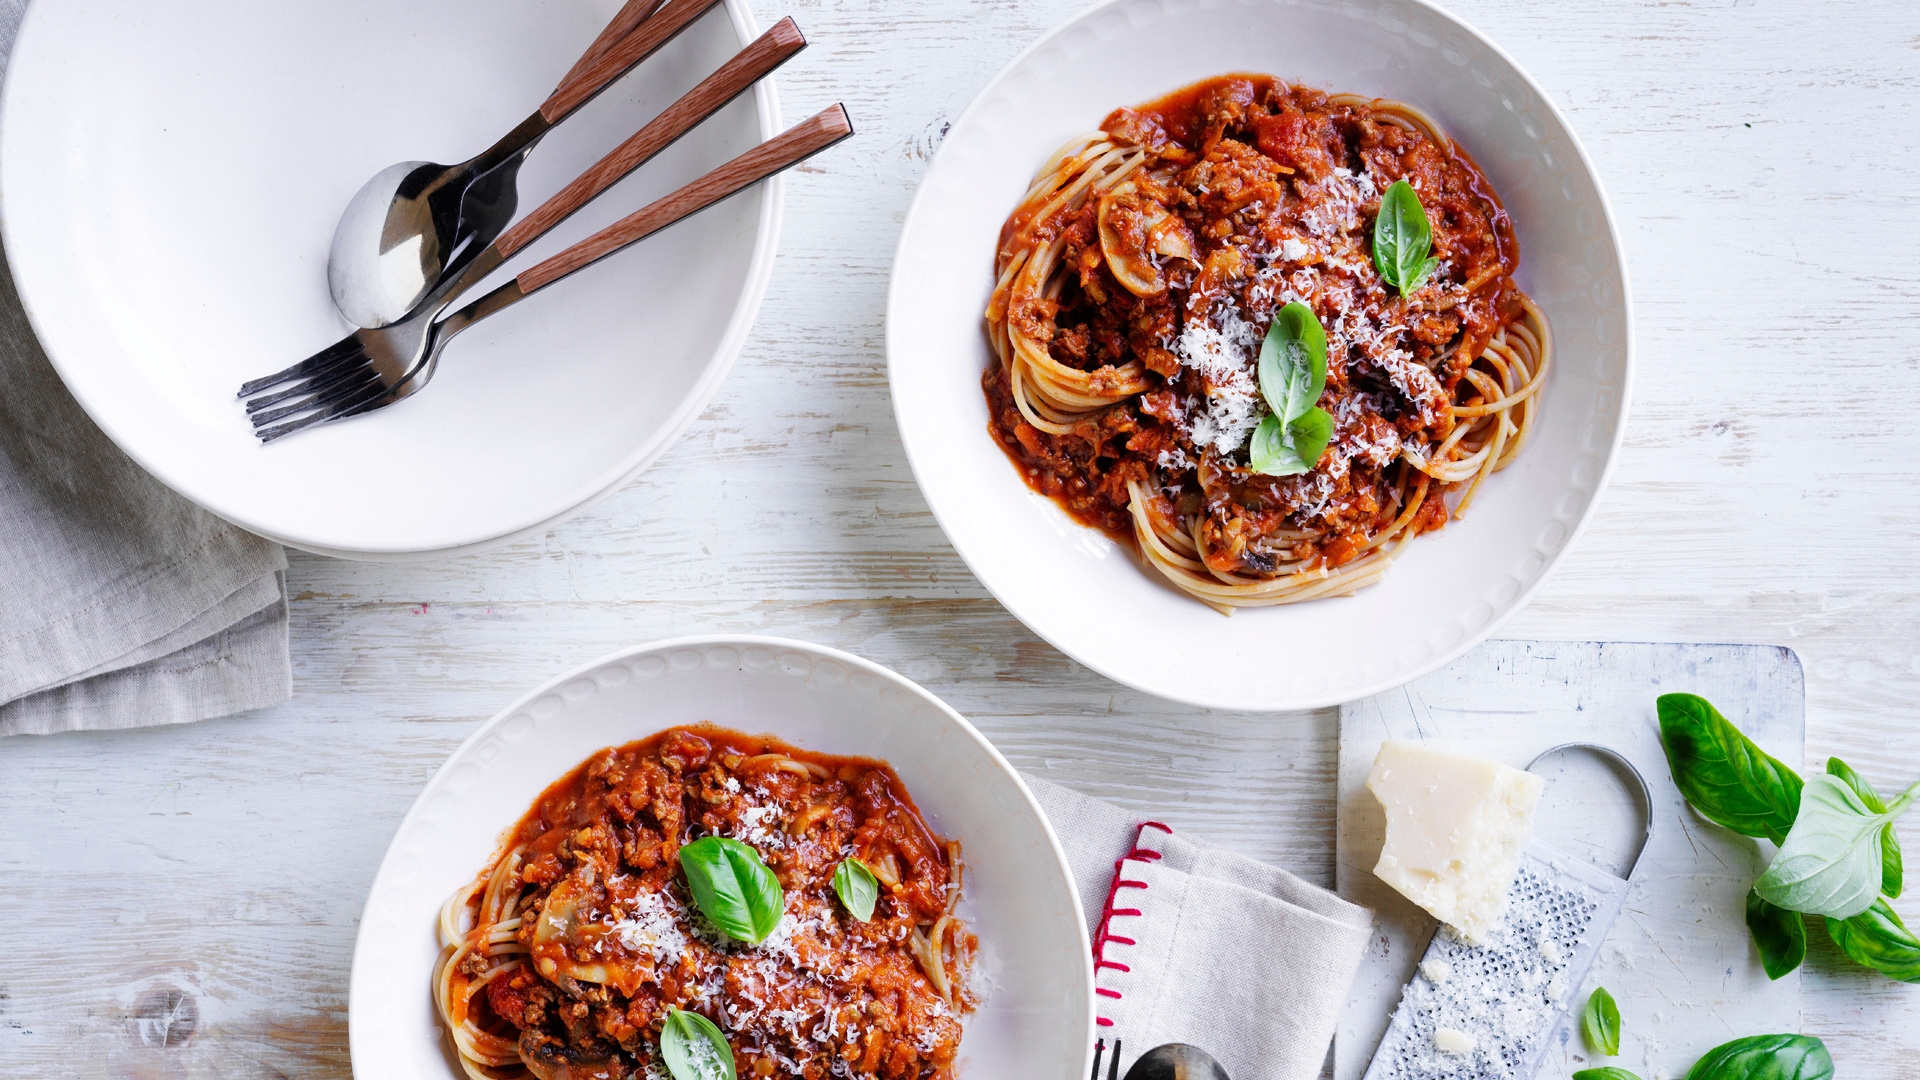 Beef and lentil bolognese - Spaghetti